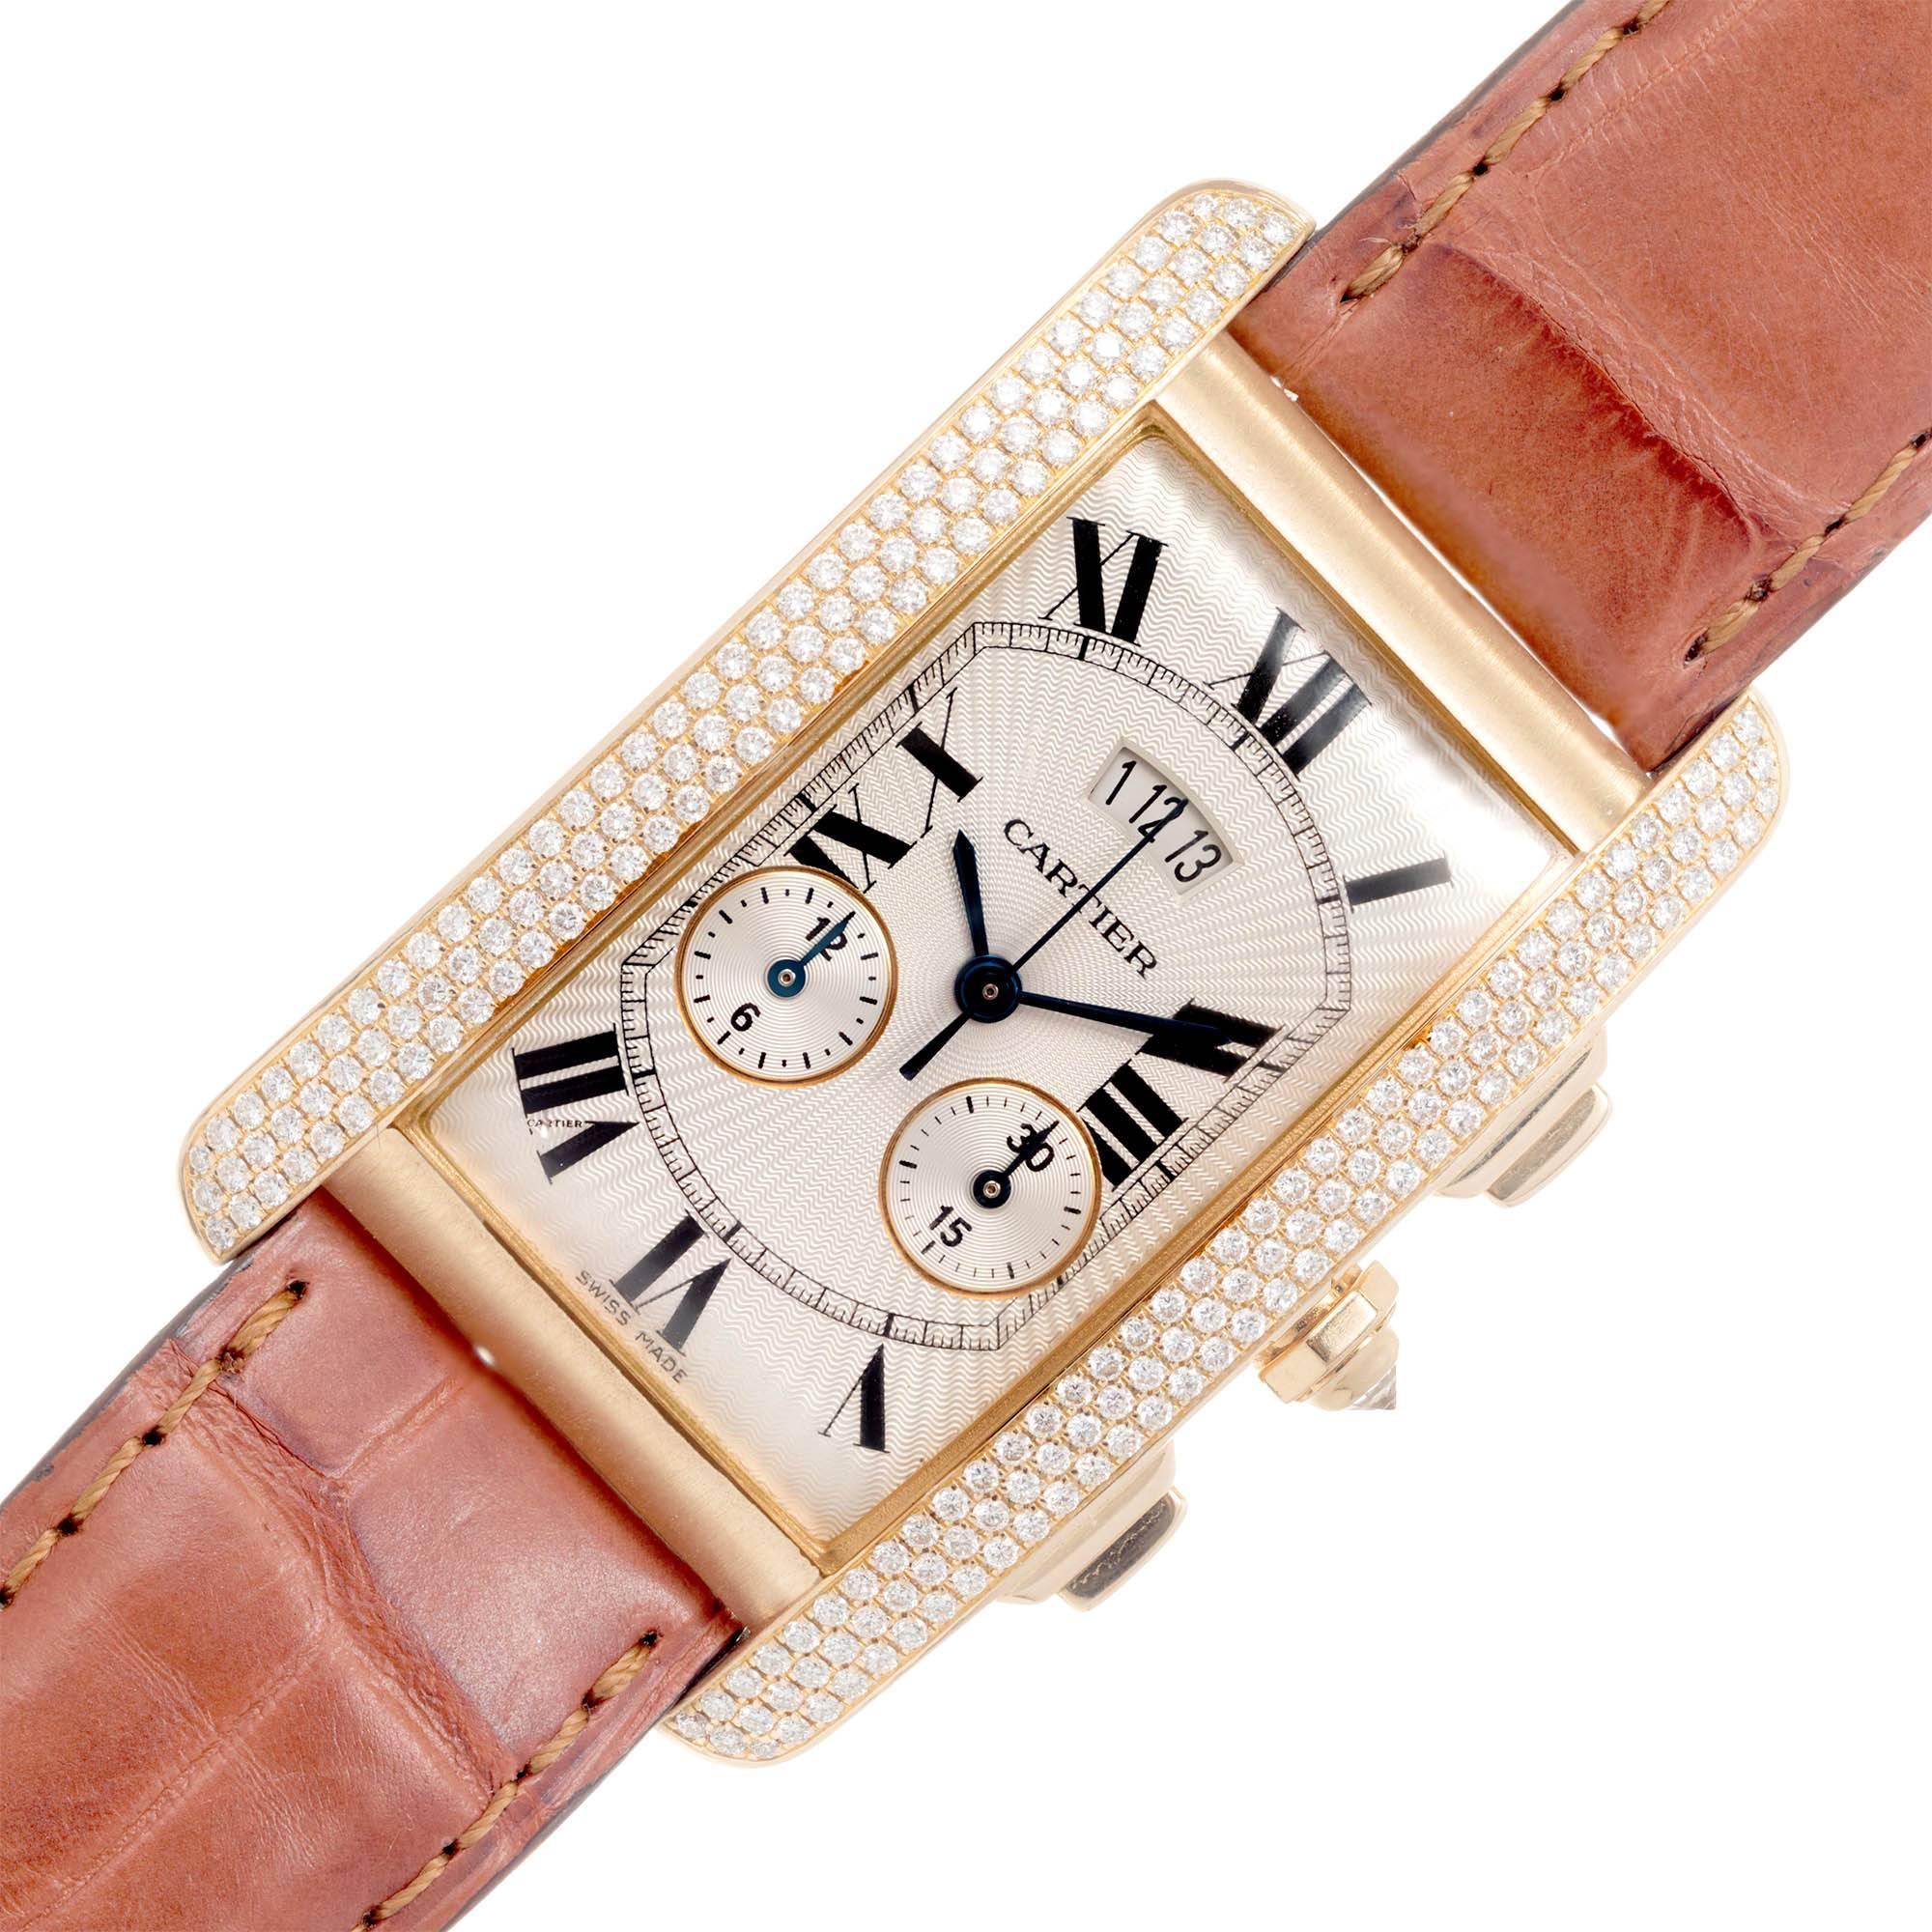 Cartier Tank Americane Model 2568  large size 18k yellow gold wrist watch with factory diamond bezel. Chronograph function shows elapsed seconds, minutes and hours. Date wheel set 12 o’clock. Brown Cartier band. Fully adjustable band with Cartier